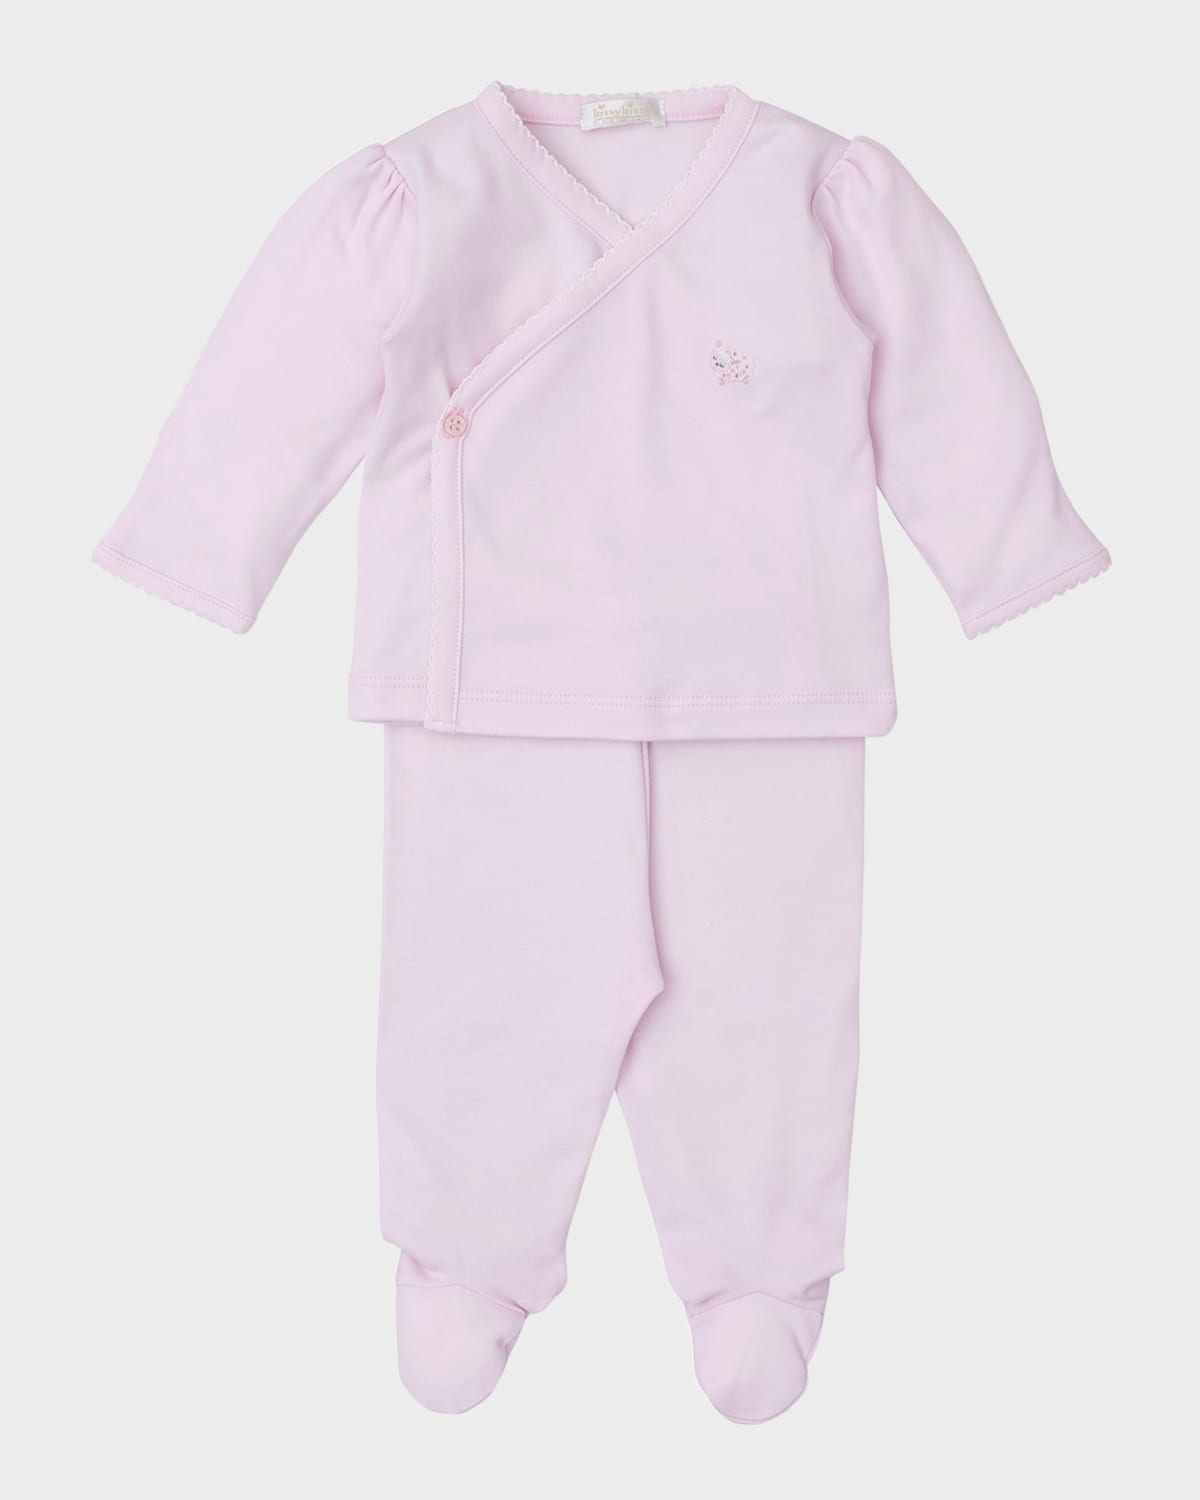 Girl's Fleecy Sheep Top and Footed Pant Set, Size Newborn-6M